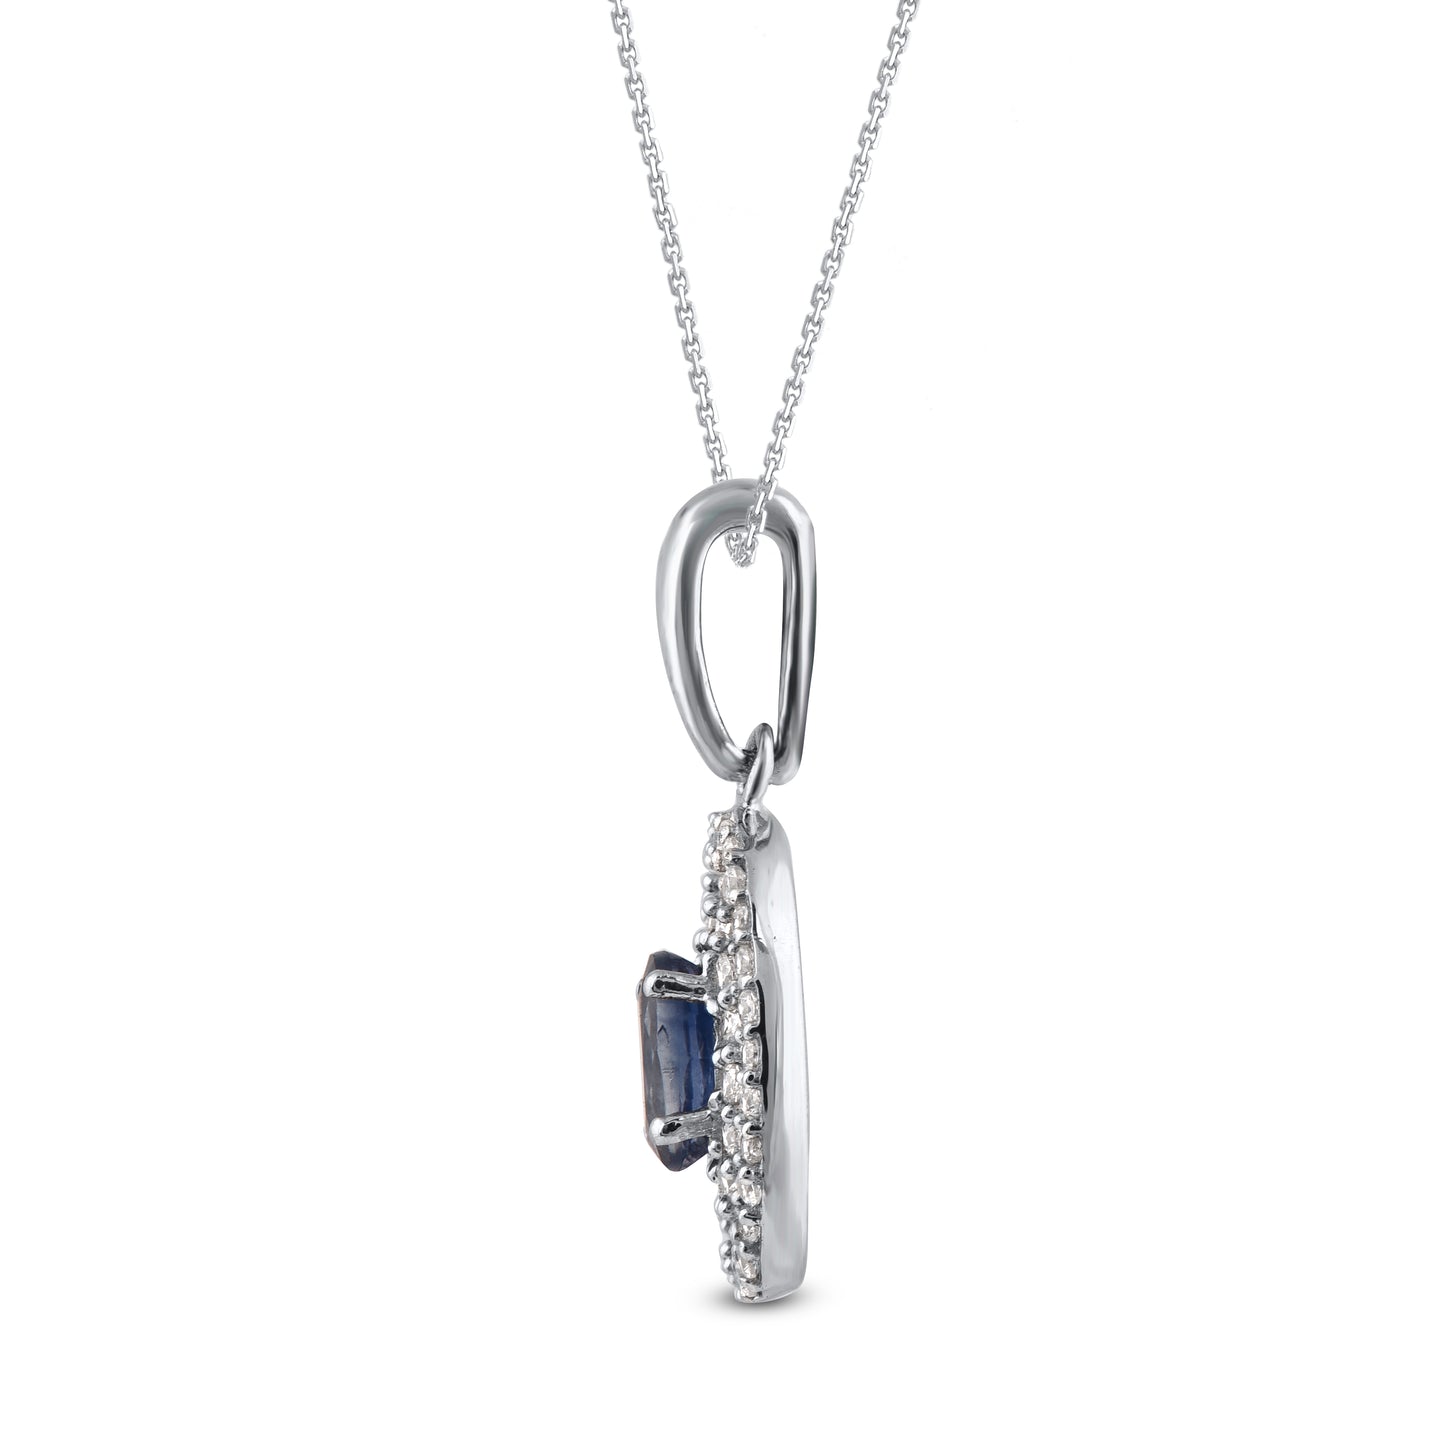 Blue Sapphire Pendant Necklace in 925 Sterling Silver